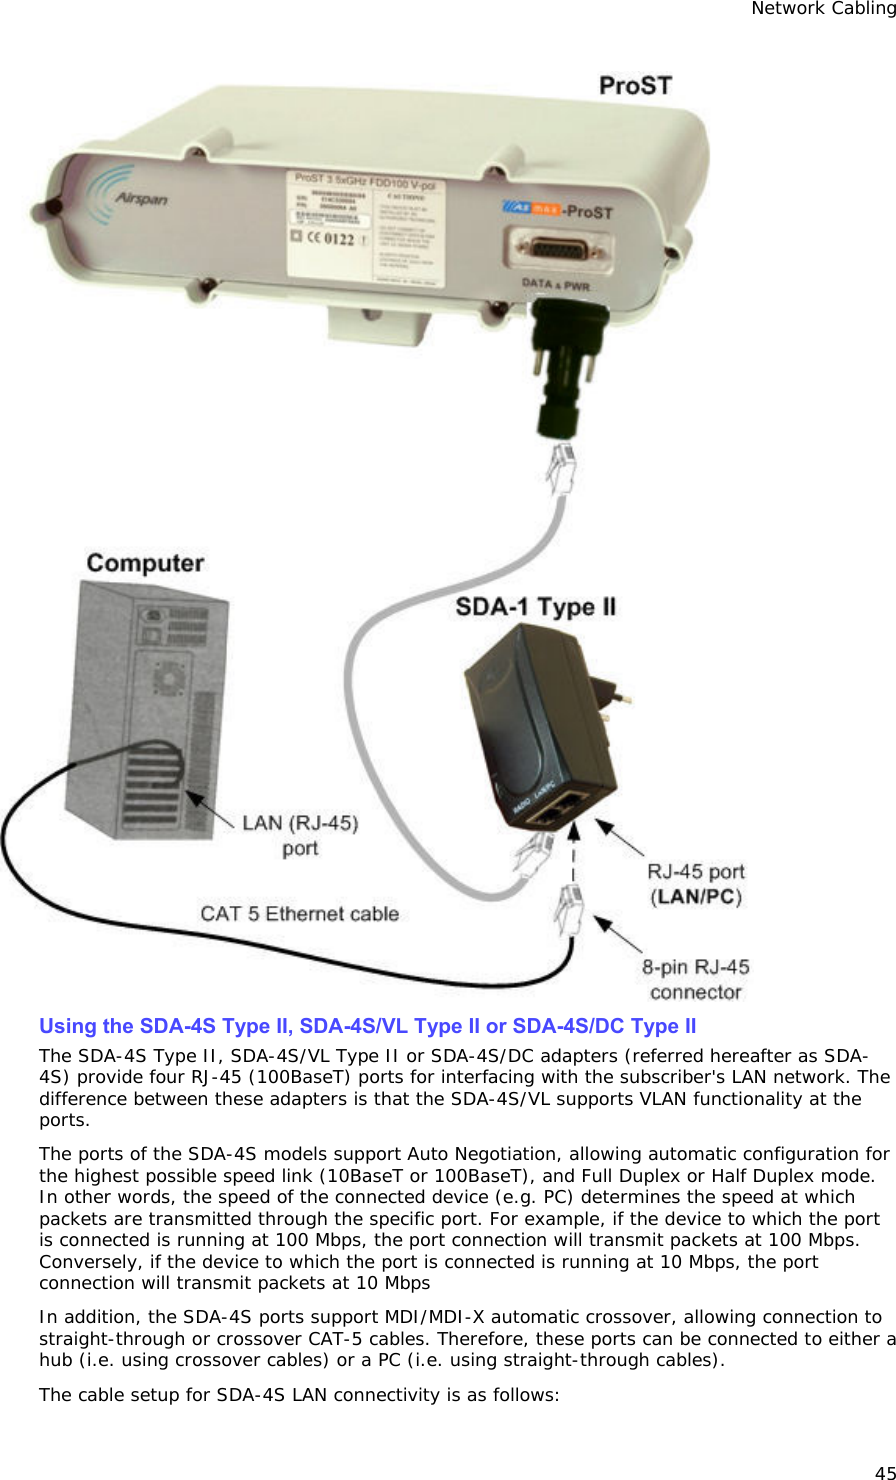 Network Cabling 45  Using the SDA-4S Type II, SDA-4S/VL Type II or SDA-4S/DC Type II The SDA-4S Type II, SDA-4S/VL Type II or SDA-4S/DC adapters (referred hereafter as SDA-4S) provide four RJ-45 (100BaseT) ports for interfacing with the subscriber&apos;s LAN network. The difference between these adapters is that the SDA-4S/VL supports VLAN functionality at the ports. The ports of the SDA-4S models support Auto Negotiation, allowing automatic configuration for the highest possible speed link (10BaseT or 100BaseT), and Full Duplex or Half Duplex mode. In other words, the speed of the connected device (e.g. PC) determines the speed at which packets are transmitted through the specific port. For example, if the device to which the port is connected is running at 100 Mbps, the port connection will transmit packets at 100 Mbps. Conversely, if the device to which the port is connected is running at 10 Mbps, the port connection will transmit packets at 10 Mbps In addition, the SDA-4S ports support MDI/MDI-X automatic crossover, allowing connection to straight-through or crossover CAT-5 cables. Therefore, these ports can be connected to either a hub (i.e. using crossover cables) or a PC (i.e. using straight-through cables). The cable setup for SDA-4S LAN connectivity is as follows: 